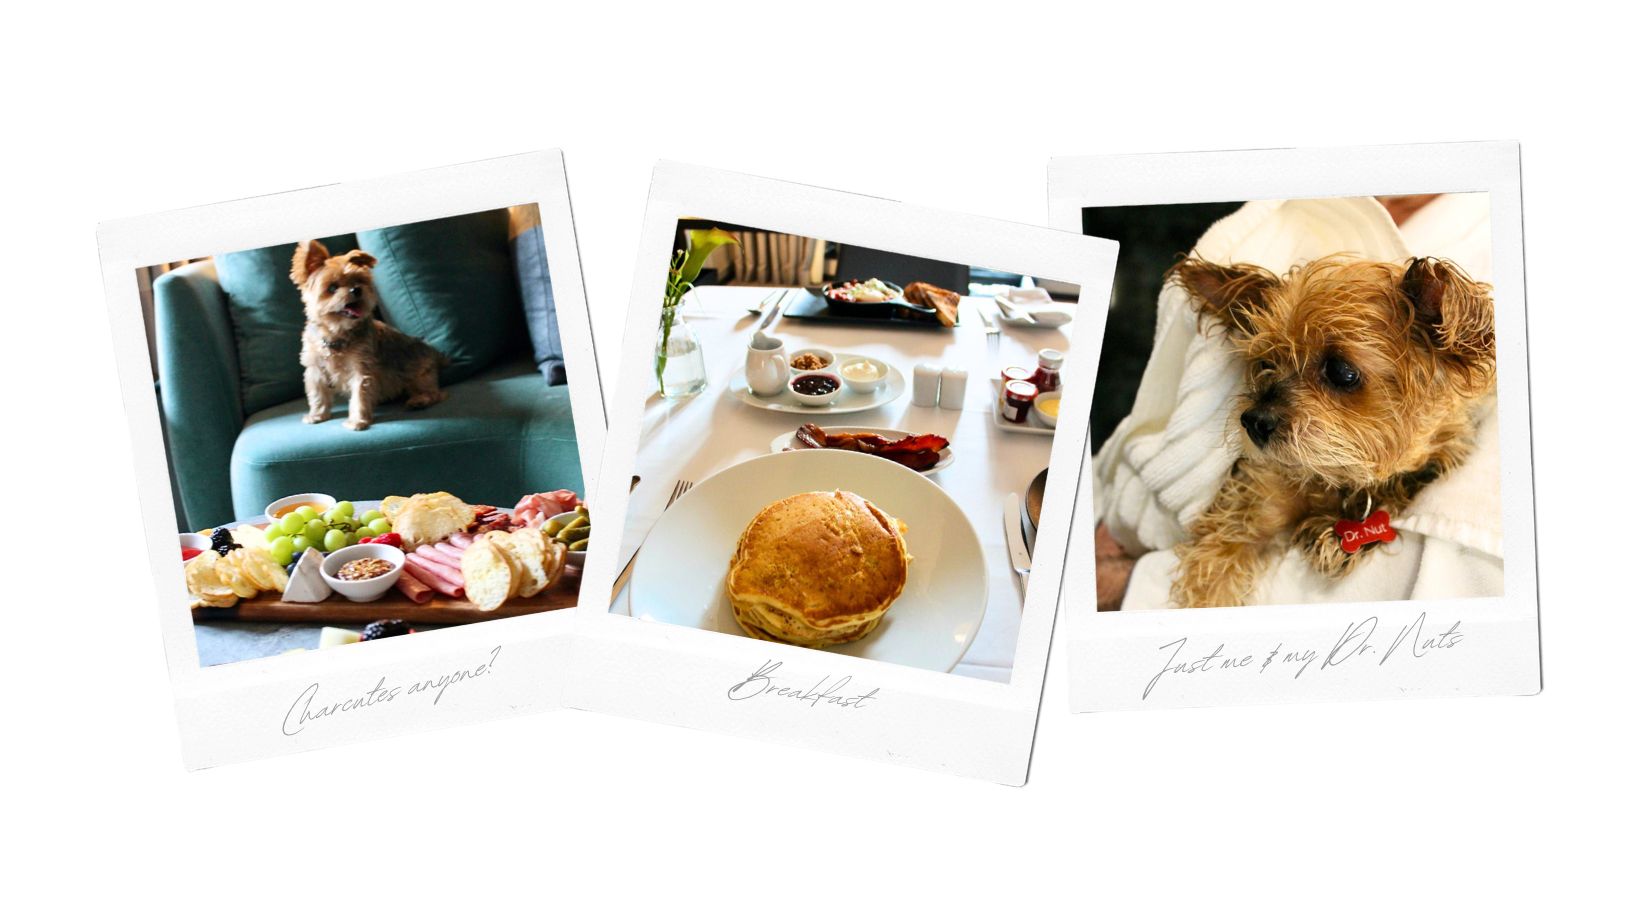 Dr Nuts and charcuterie at The Hazelton Hotel Toronto which is dog-friendly near you.